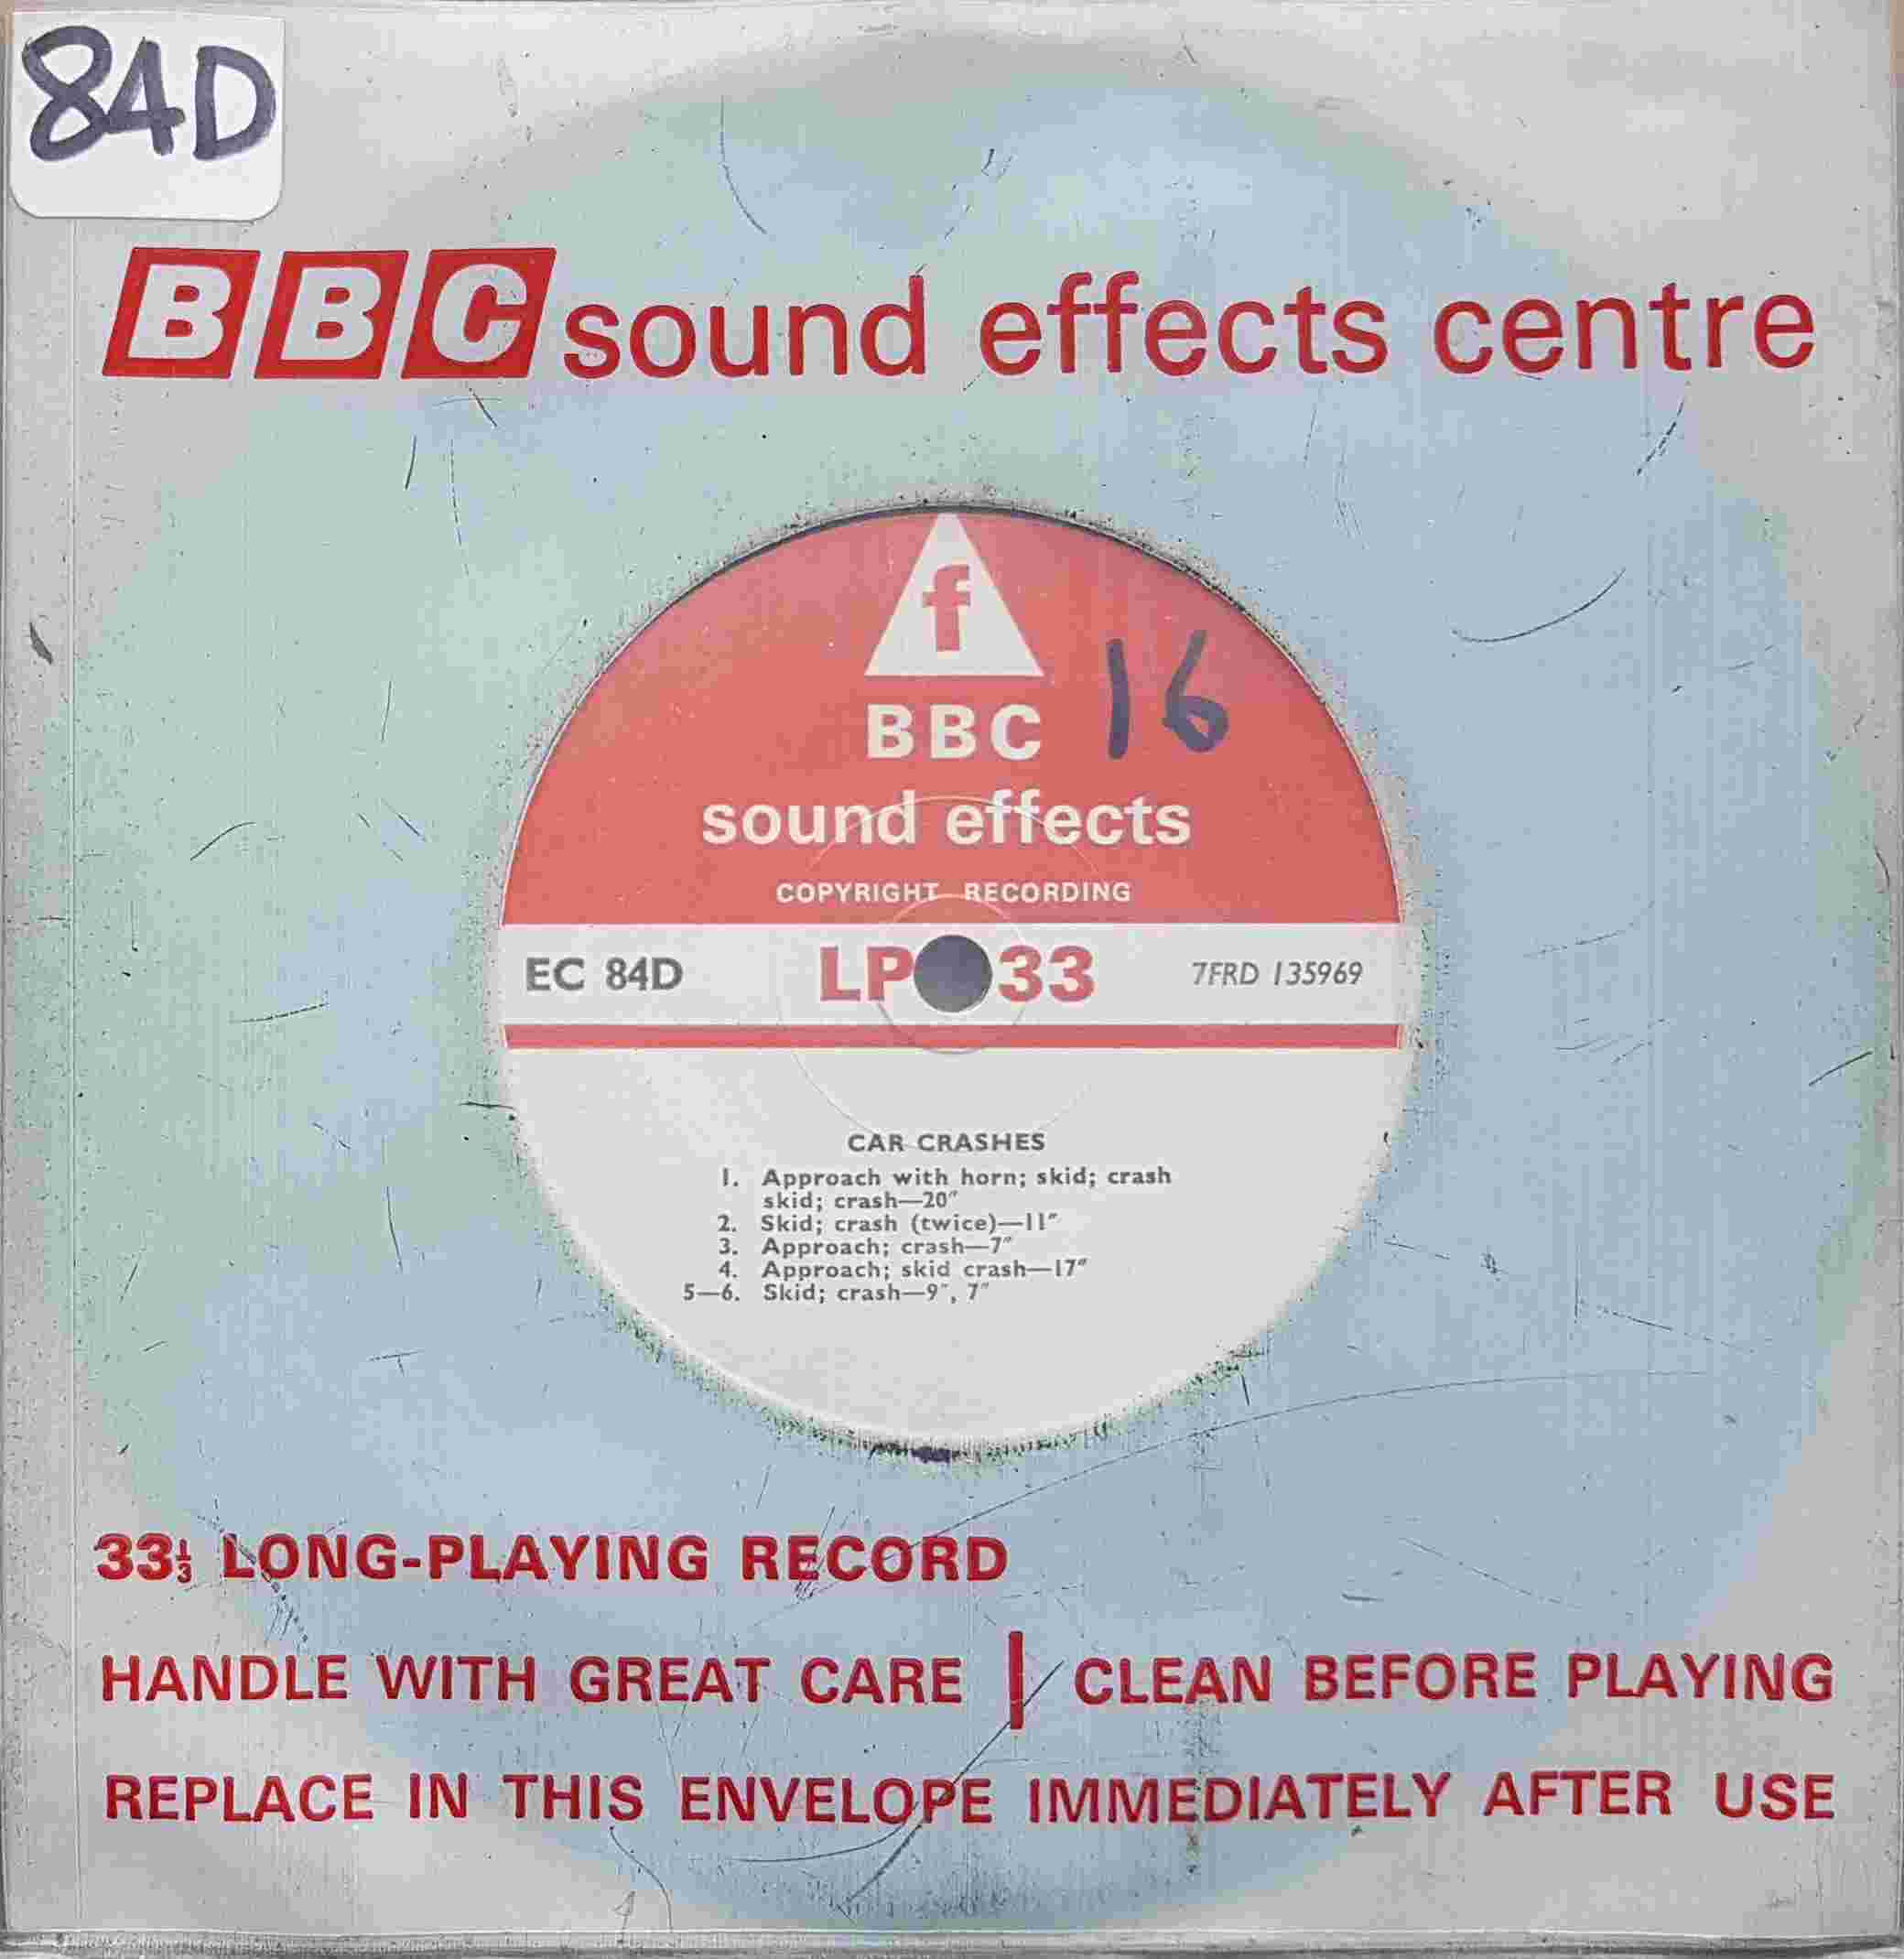 Picture of EC 84D Car crashes by artist Not registered from the BBC records and Tapes library